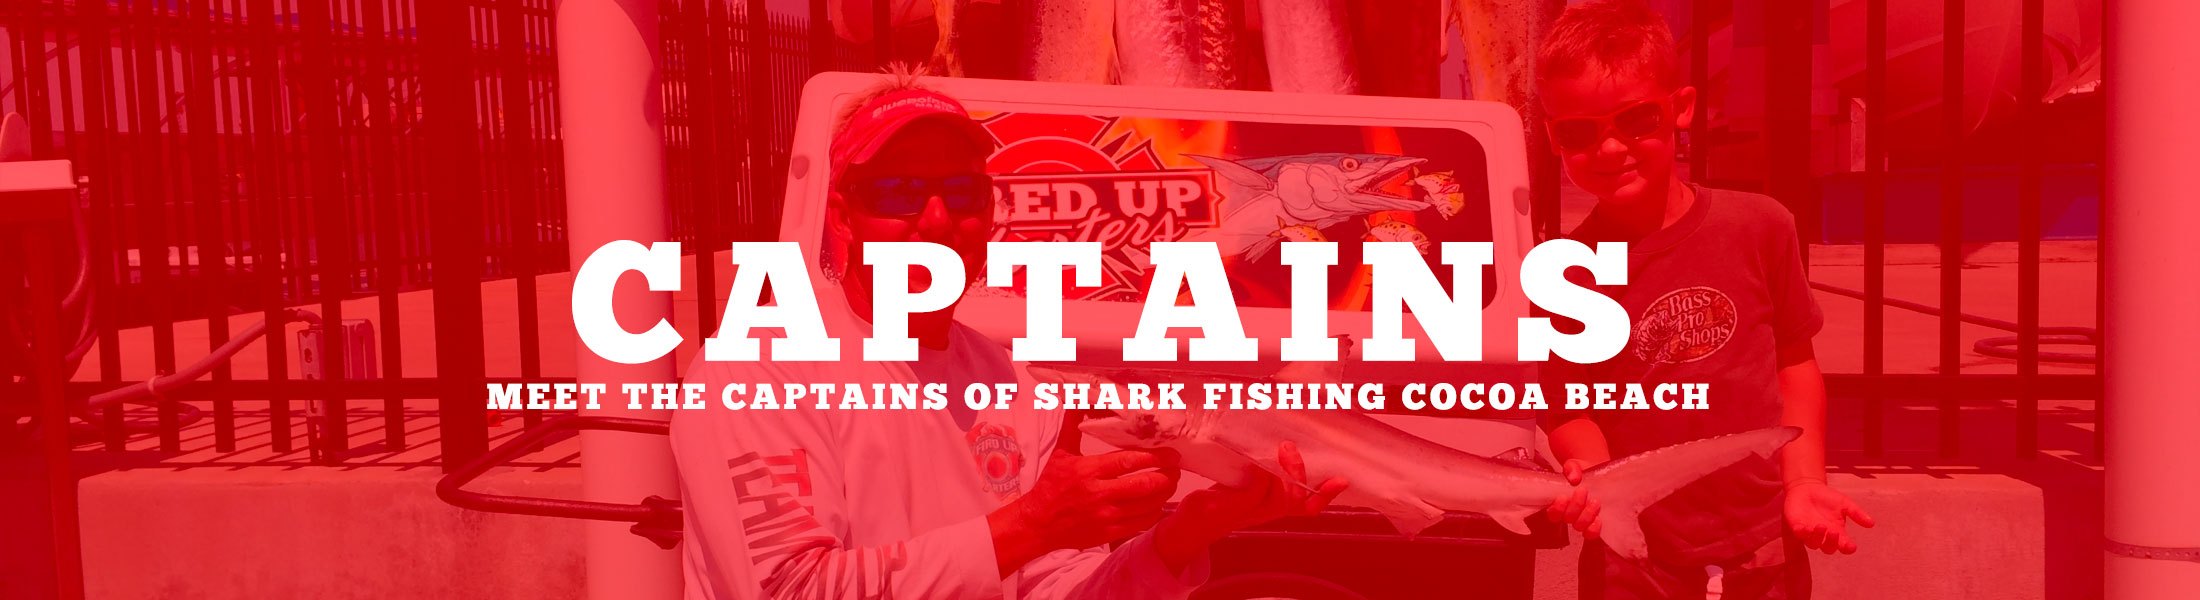 Shark Fishing Cocoa Beach has the best captains in Cape Canaveral.